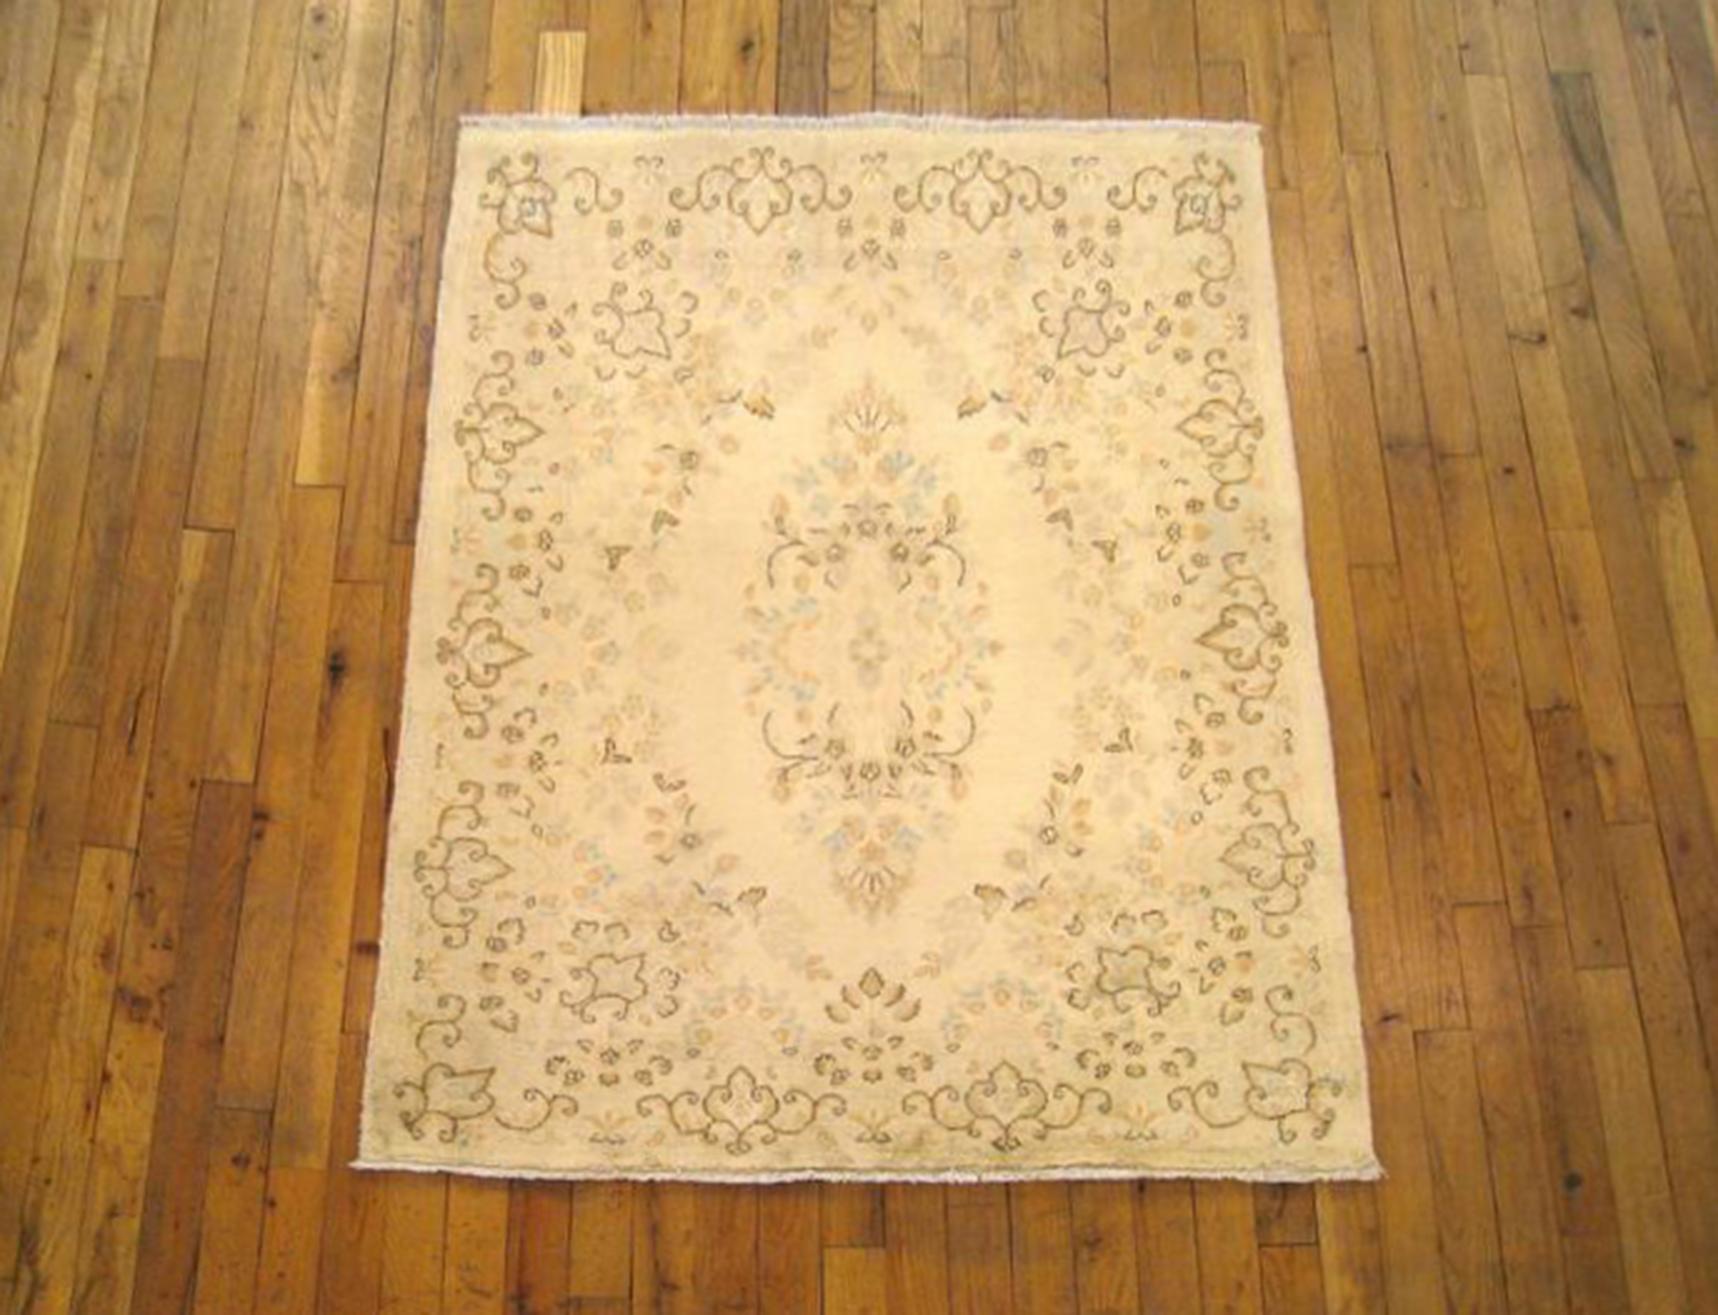 A vintage Persian Kerman rug from Persian Gallery New York, size 4'0 x 3'2, circa 1940. This fine handwoven wool carpet features a lovely floral motif in the ivory central field, with diffuse central medallion and an uncluttered border, making for